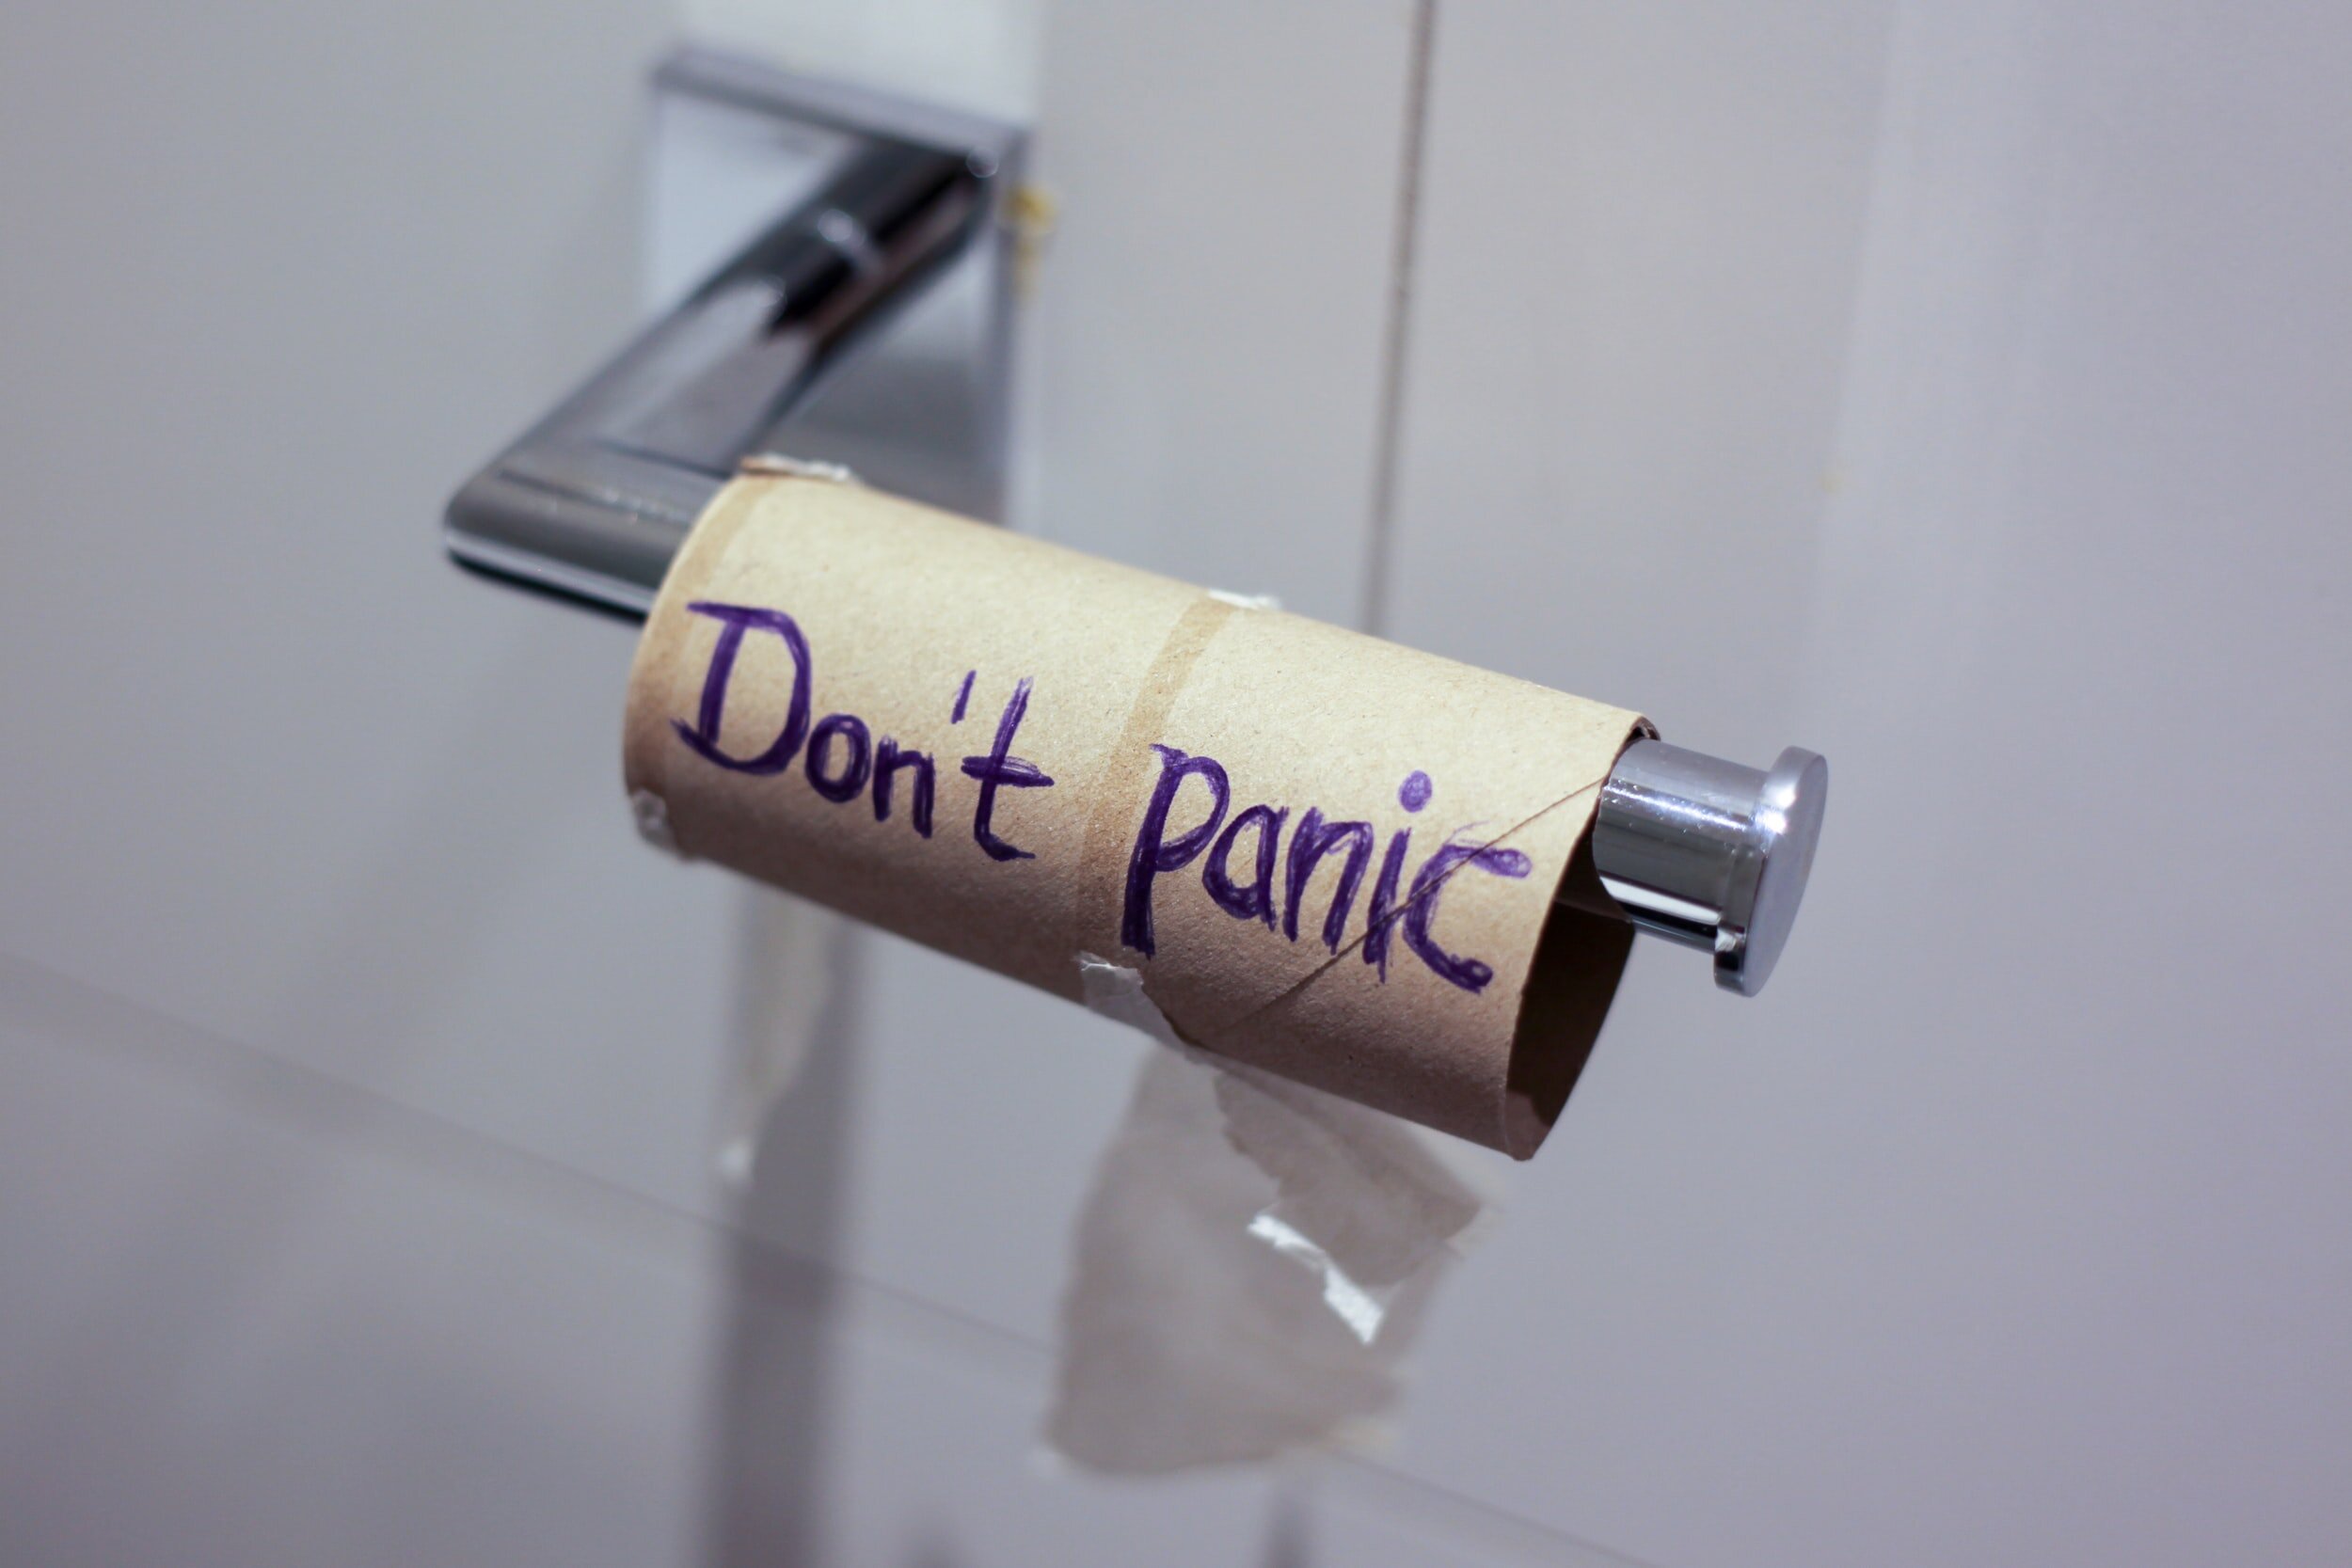 Photo by Jasmin Sessler on UnsplashPicture of an empty toilet paper roll saying “don’t panic.” Easier said than done!